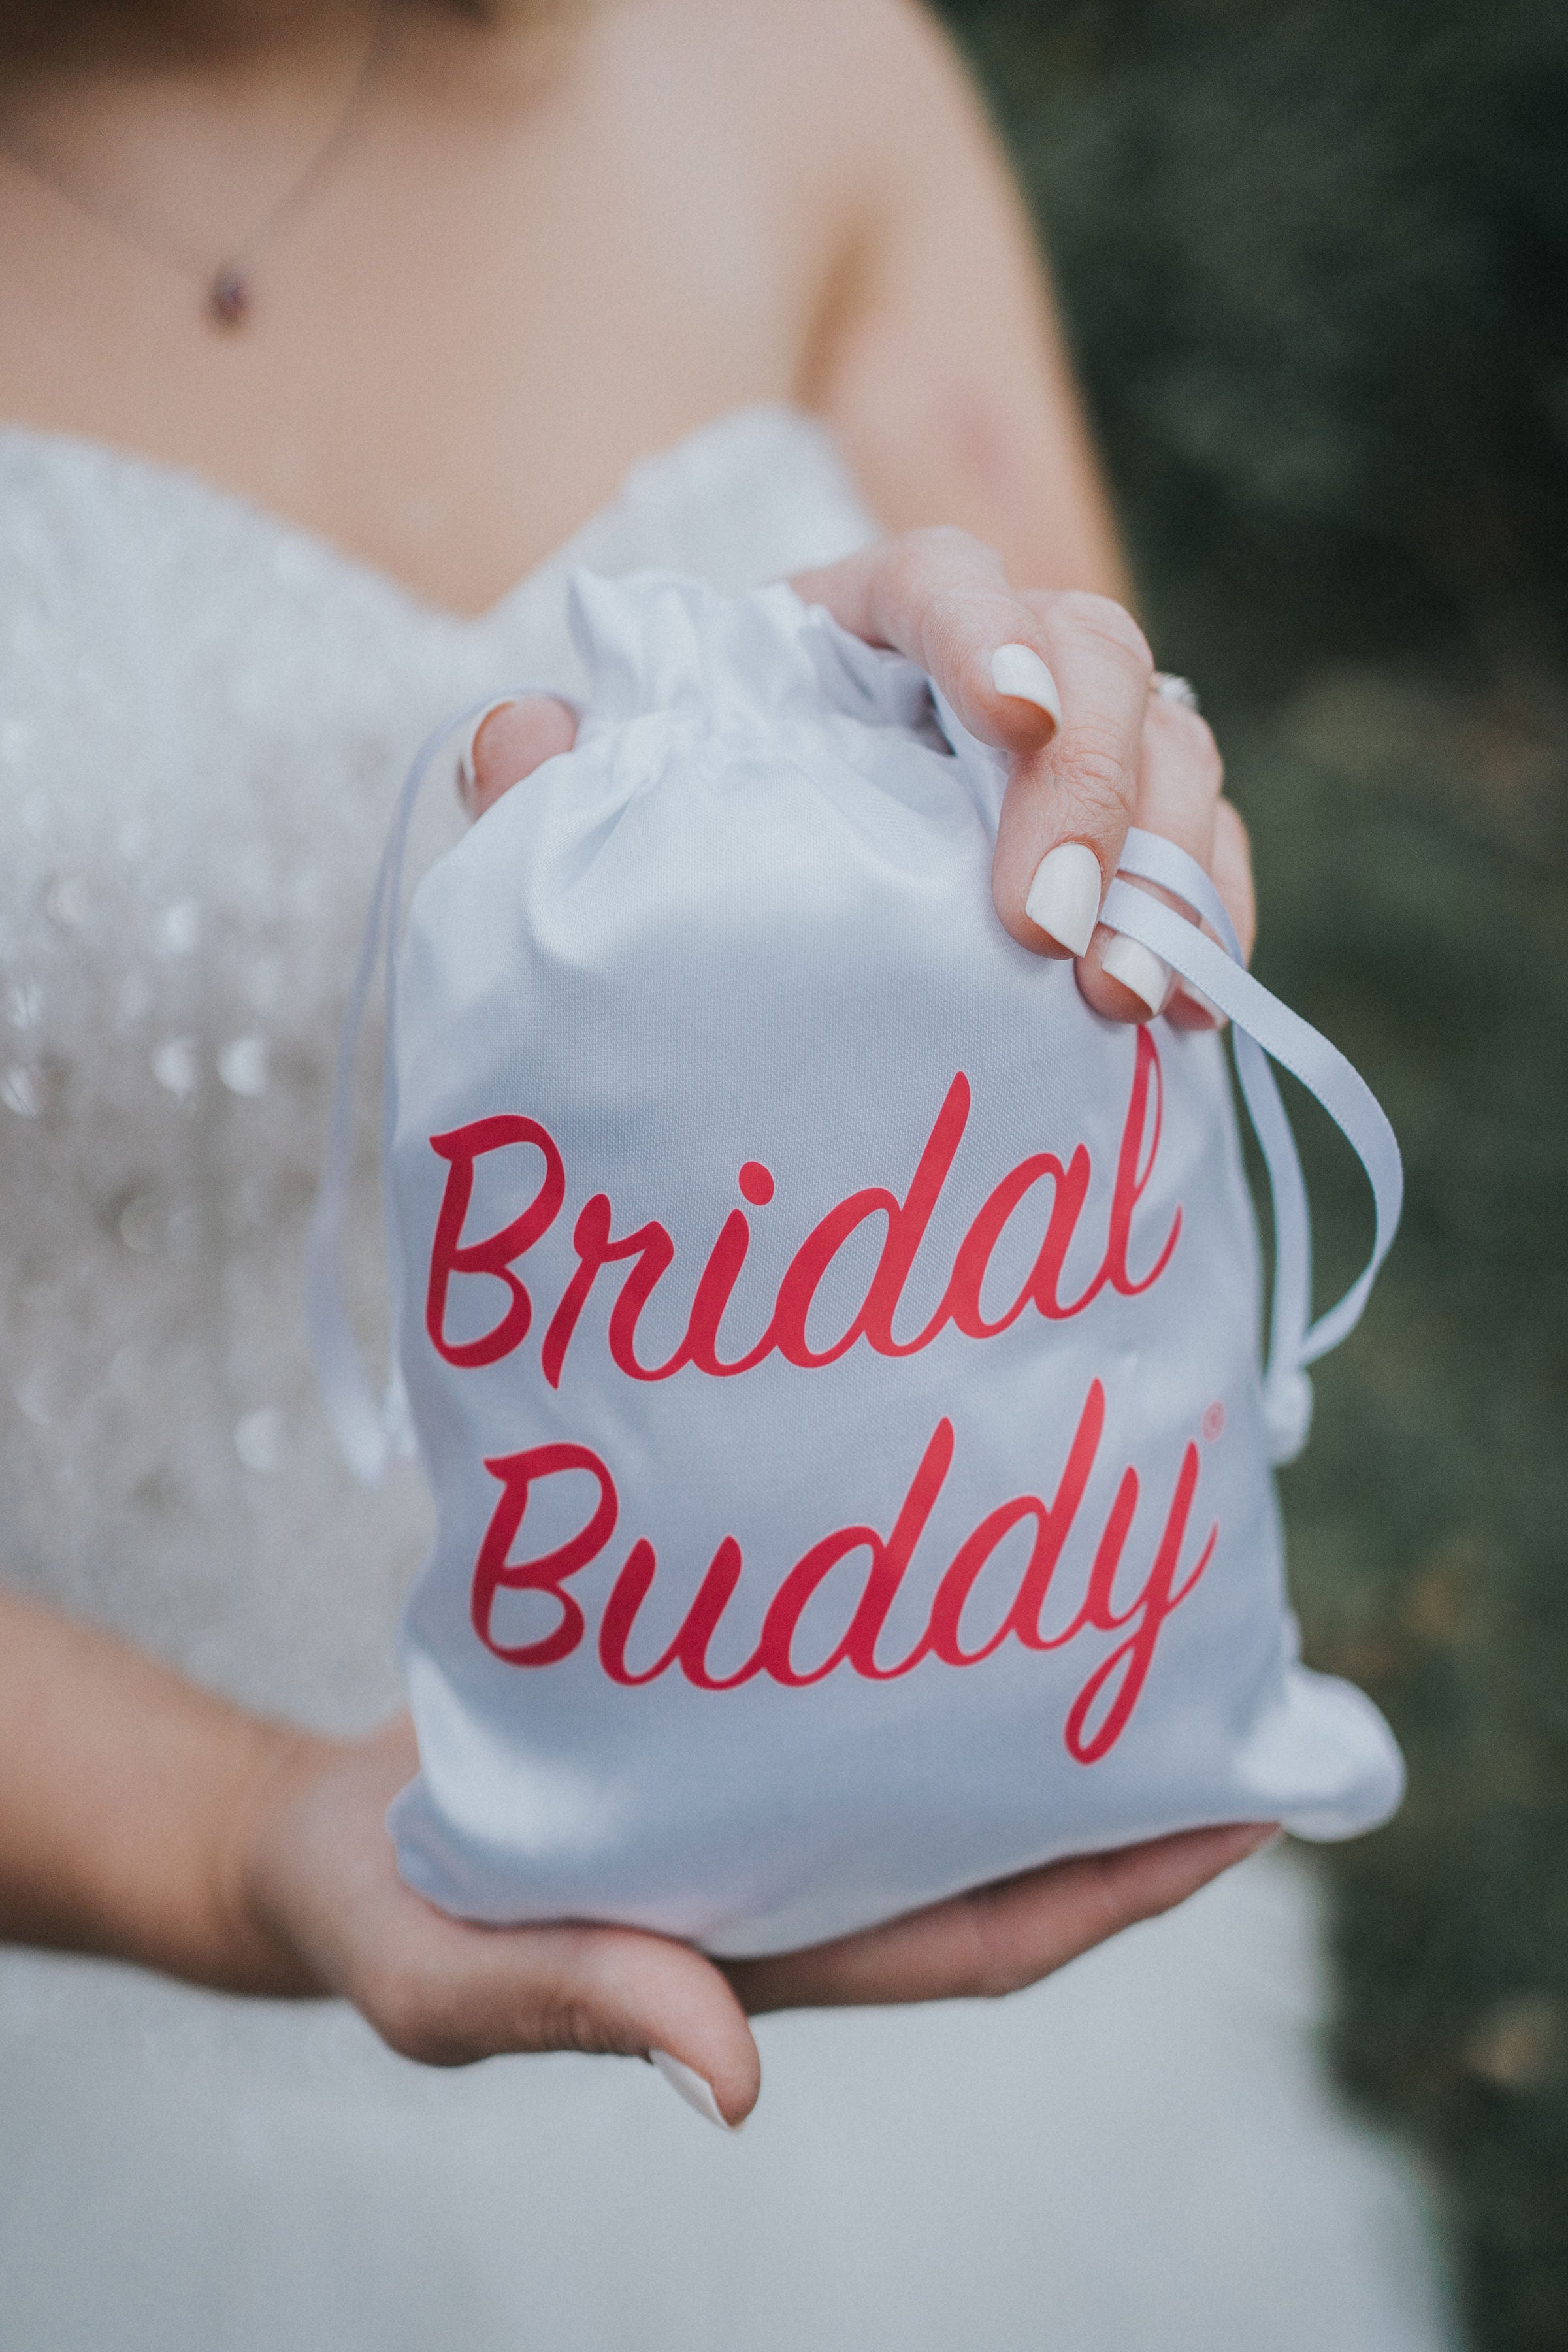 The Bridal Buddy allows brides to use the toilet without